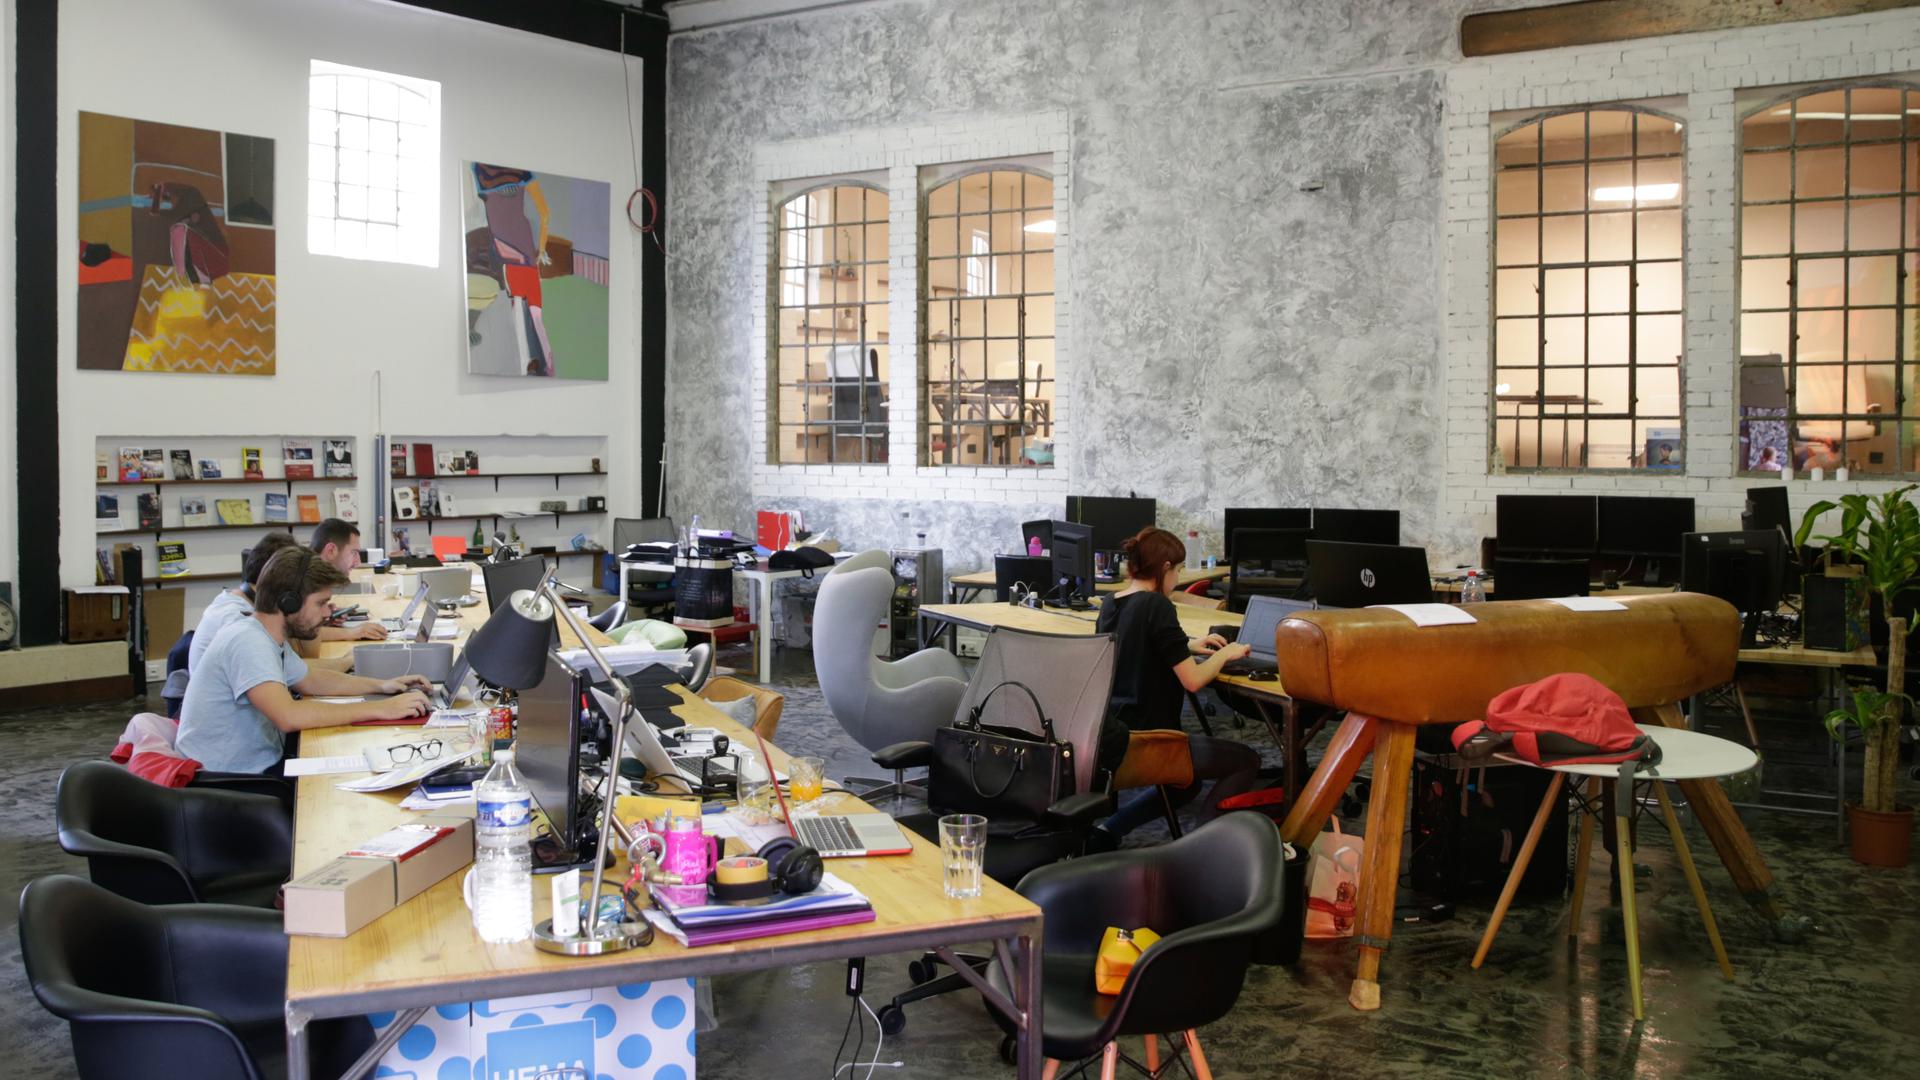 Co-working spaces encourage collaboration, exchange and an can be an incubator for creatives and business entrepreneurs alike